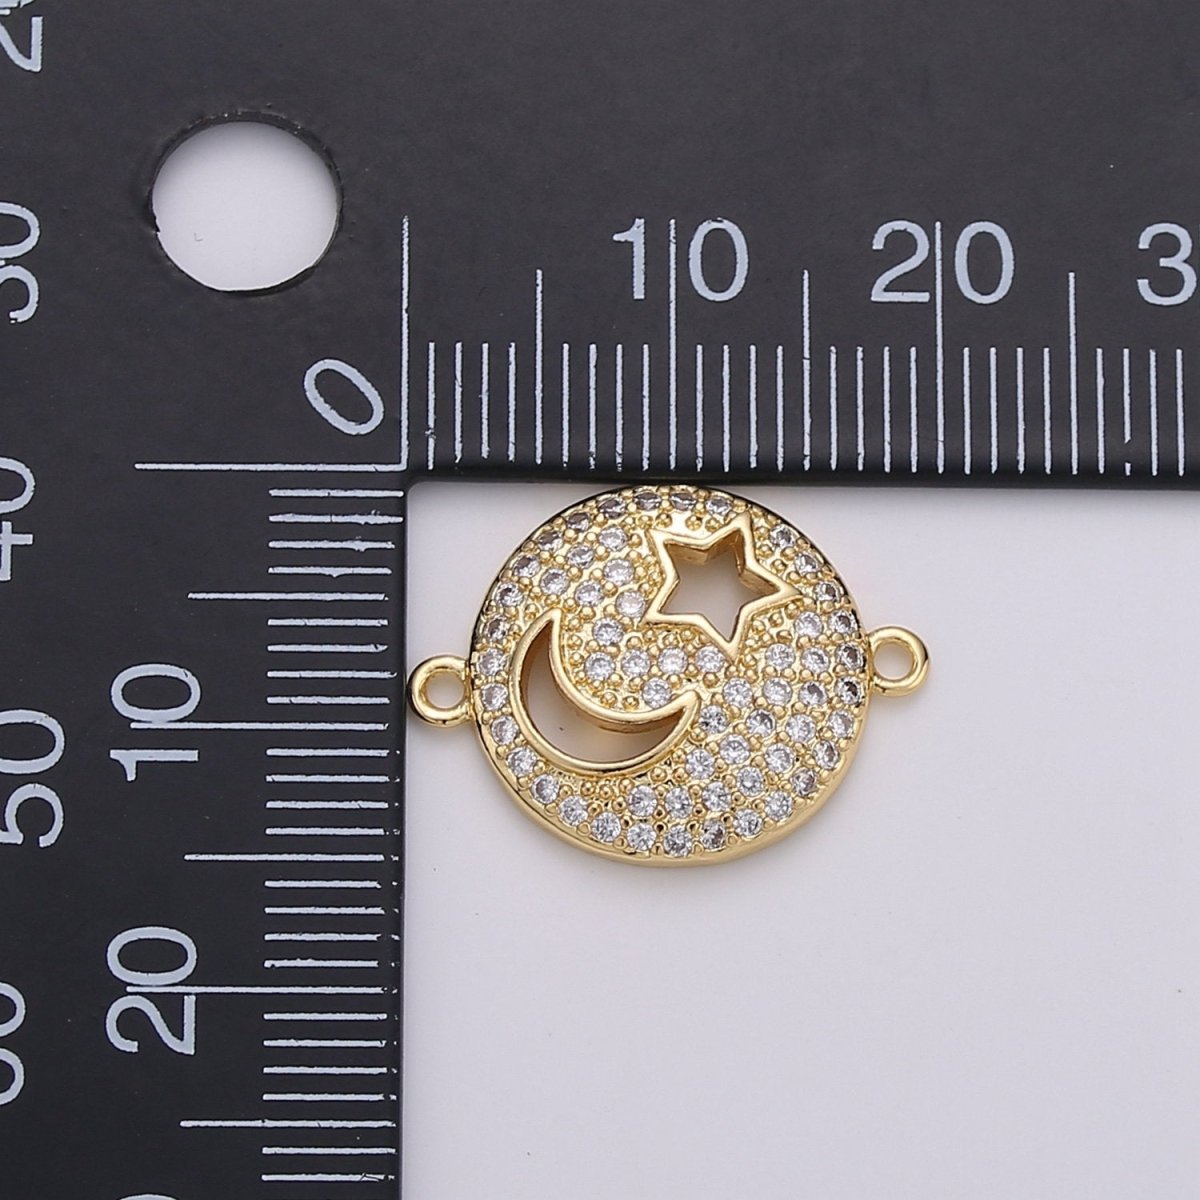 Dainty Celestial Round Charm Connector- 14k Gold Filled Moon Star Sun Charm for Bracelet Necklace Link Connector Component Cz Charm F-467 - DLUXCA